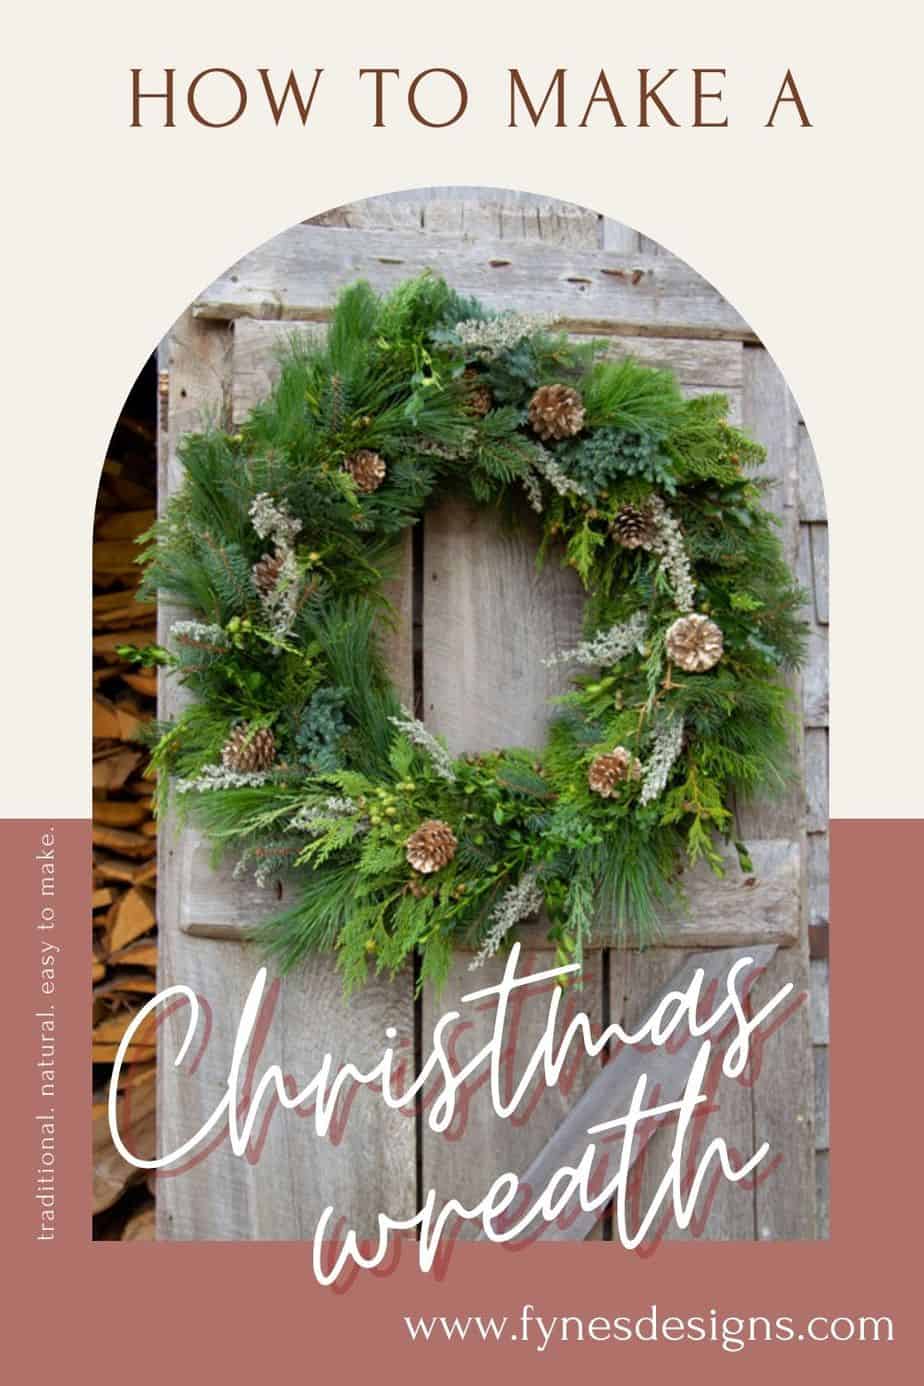 How to Use Wood Floral Picks in Wreaths